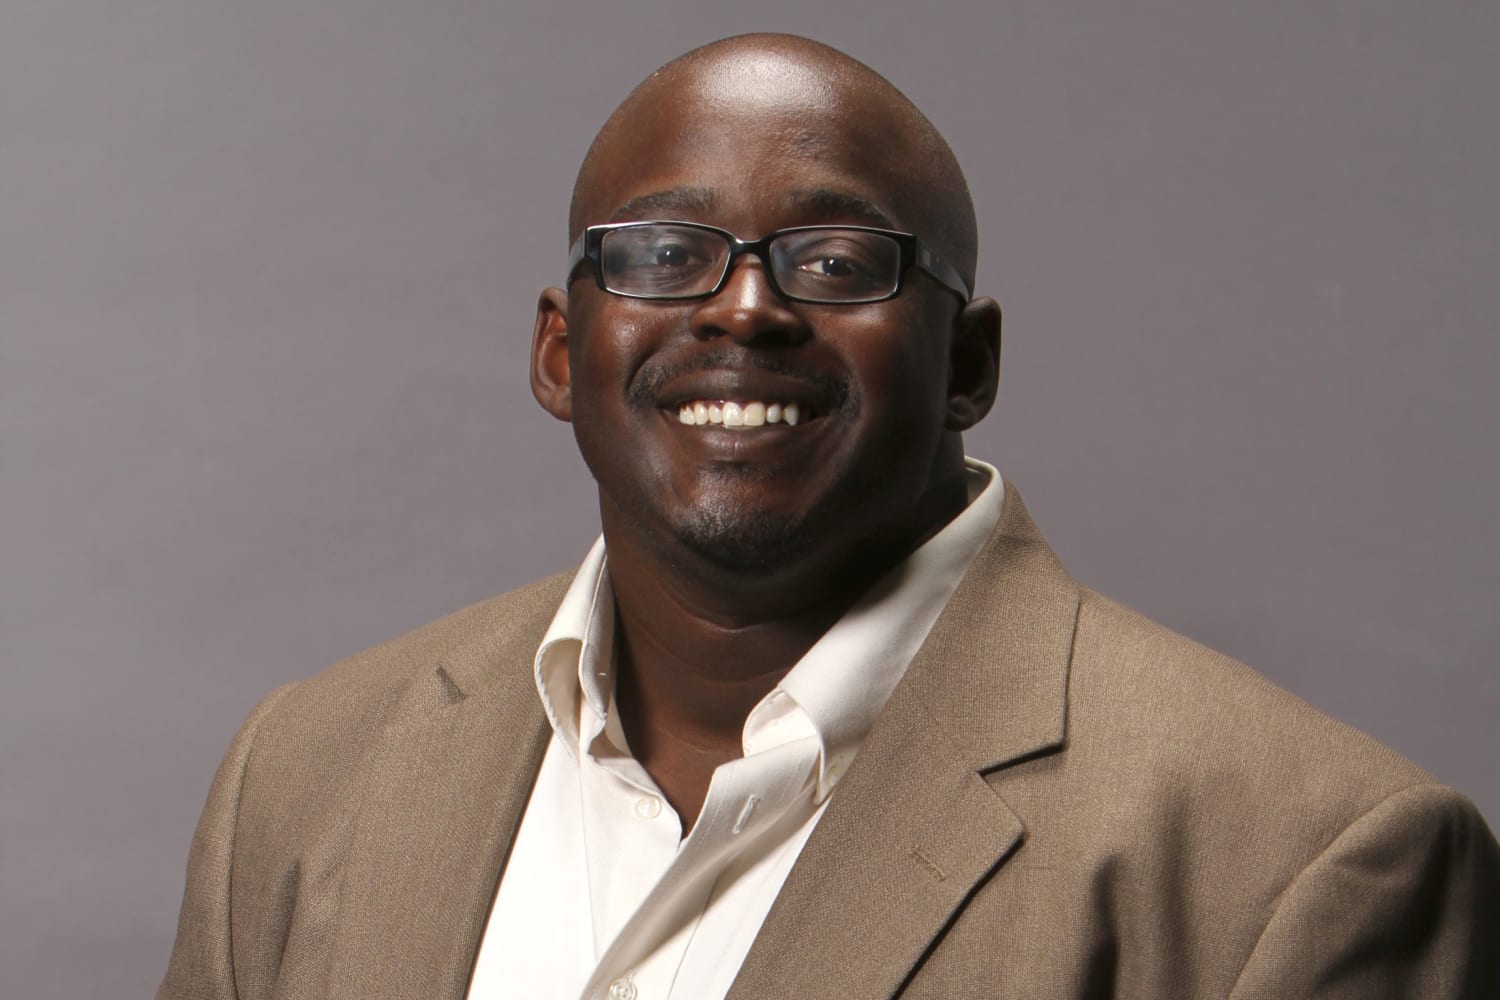 Yahoo Sports National NFL Writer Terez Paylor Dies Unexpectedly at the Age of 37